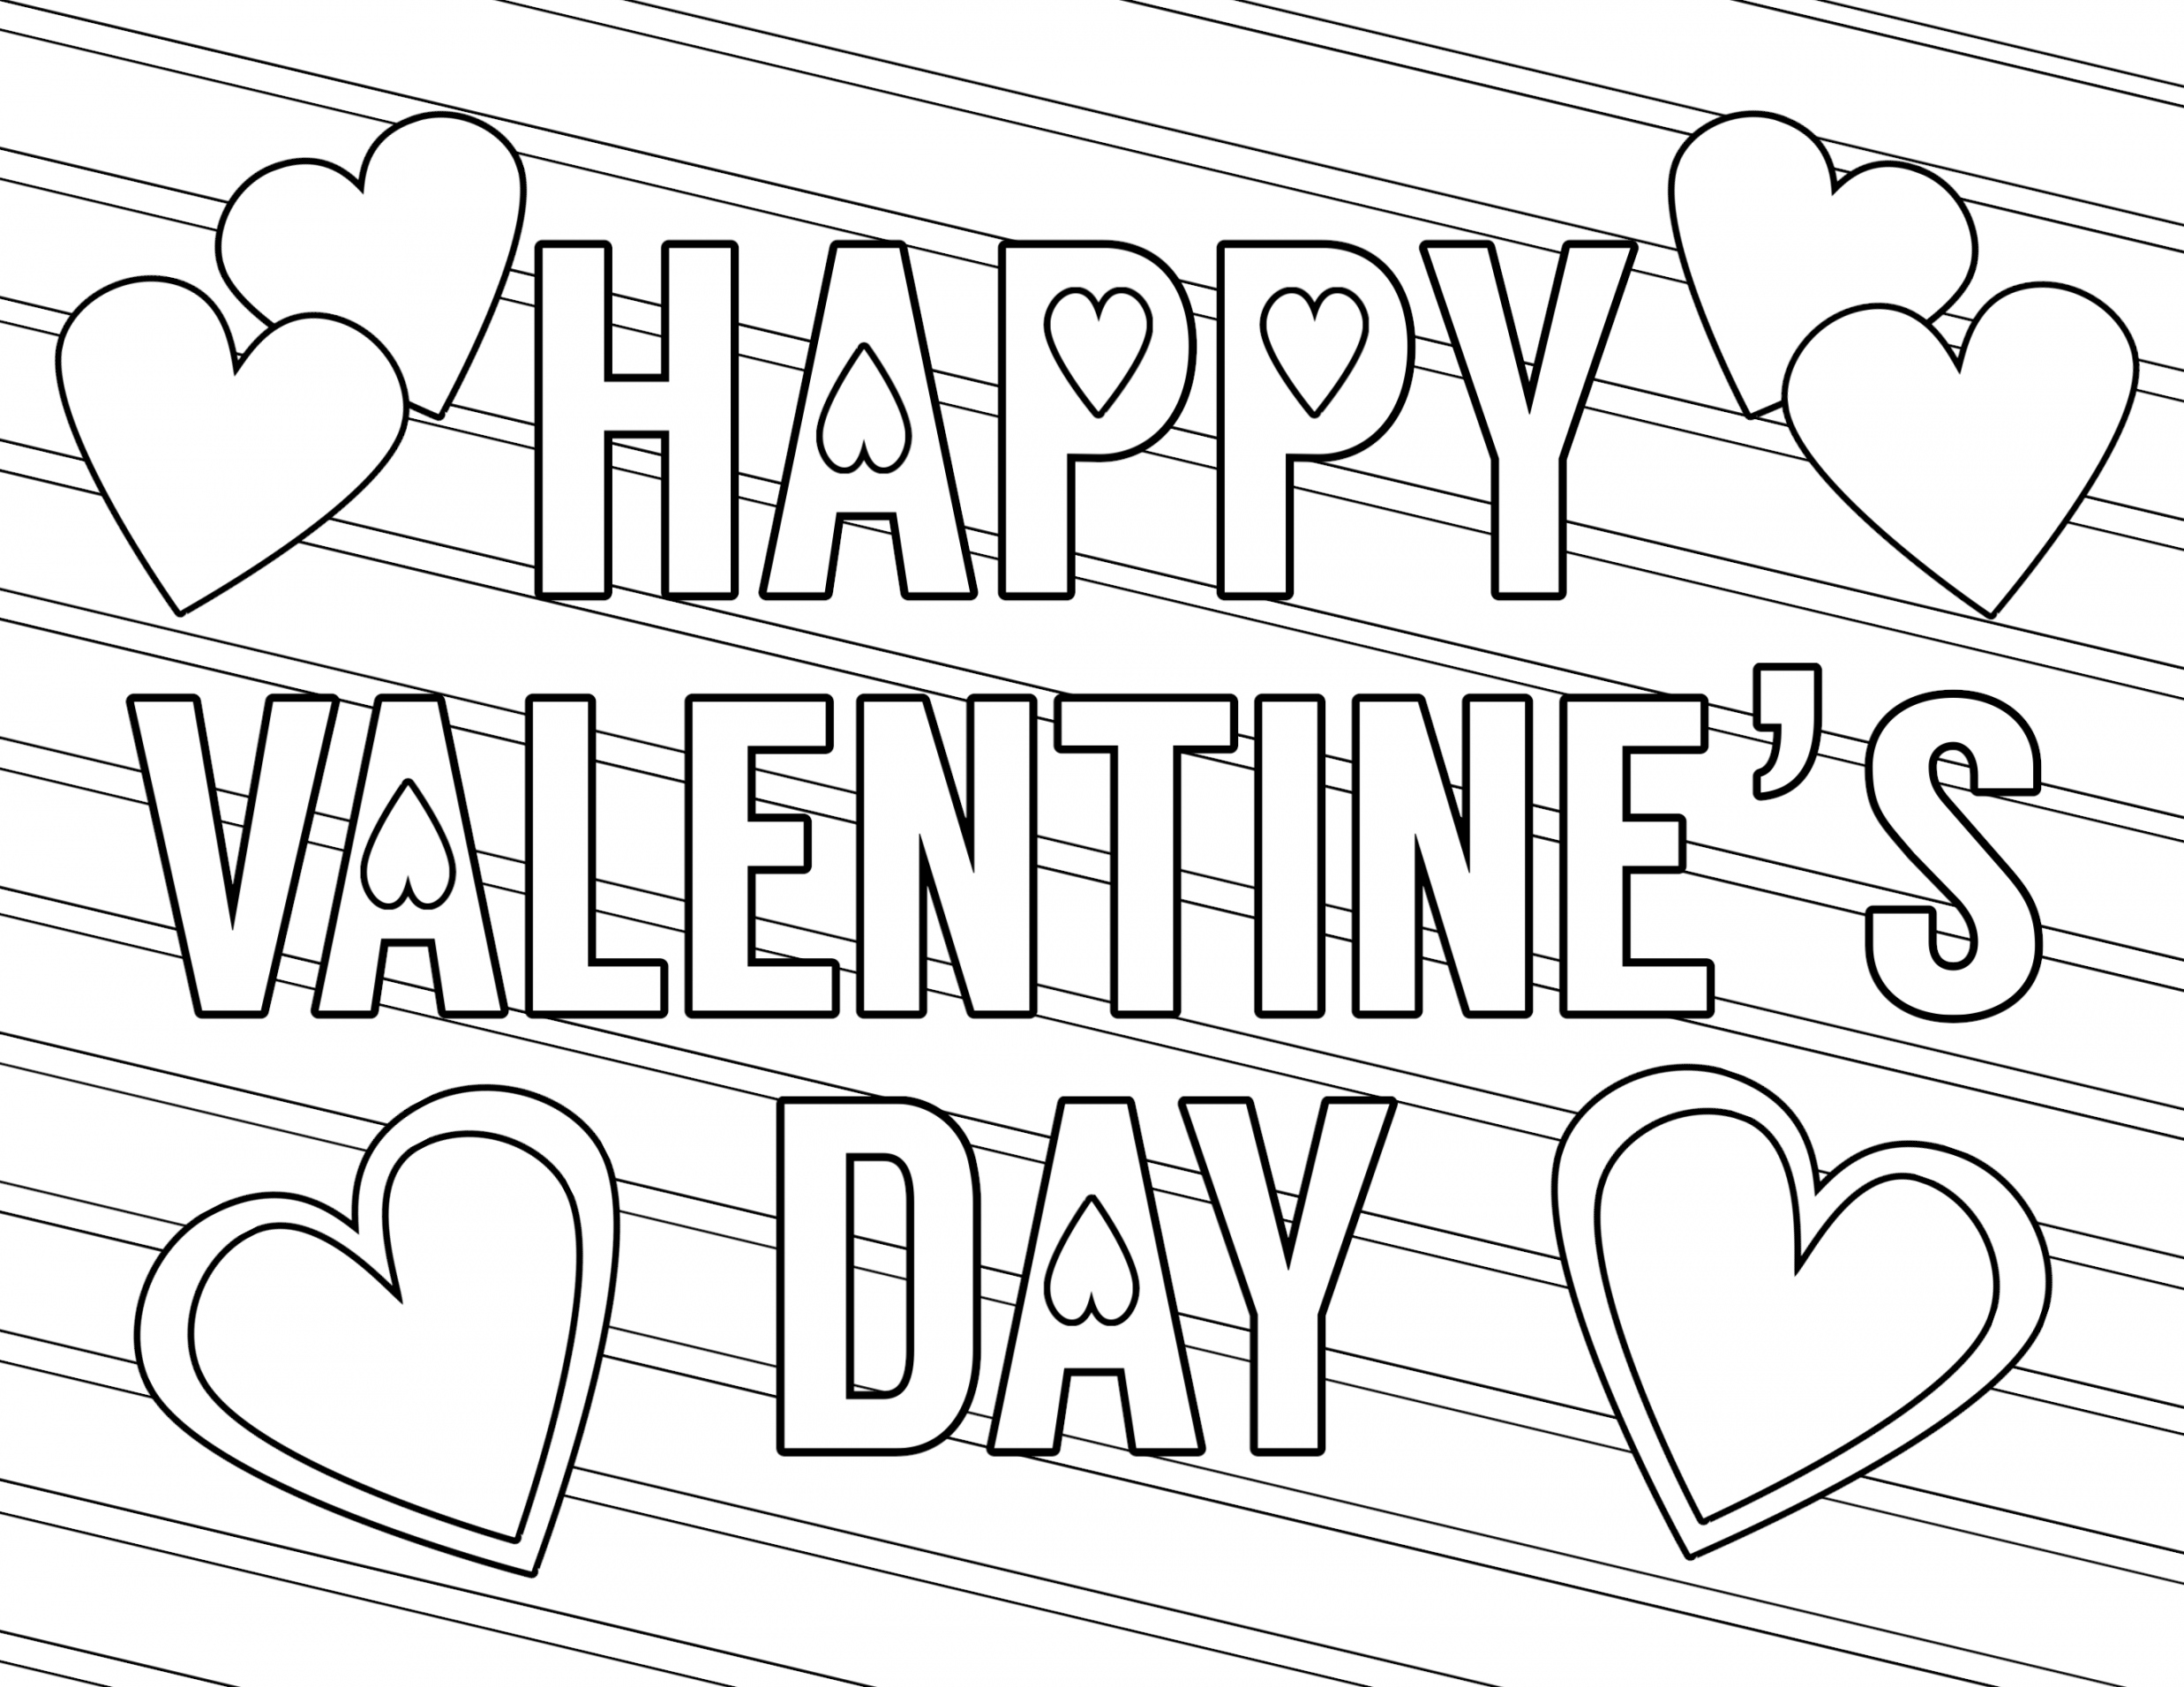 Free Printable Valentines Coloring Pages - Printable - Free Printable Valentine Coloring Pages - Paper Trail Design